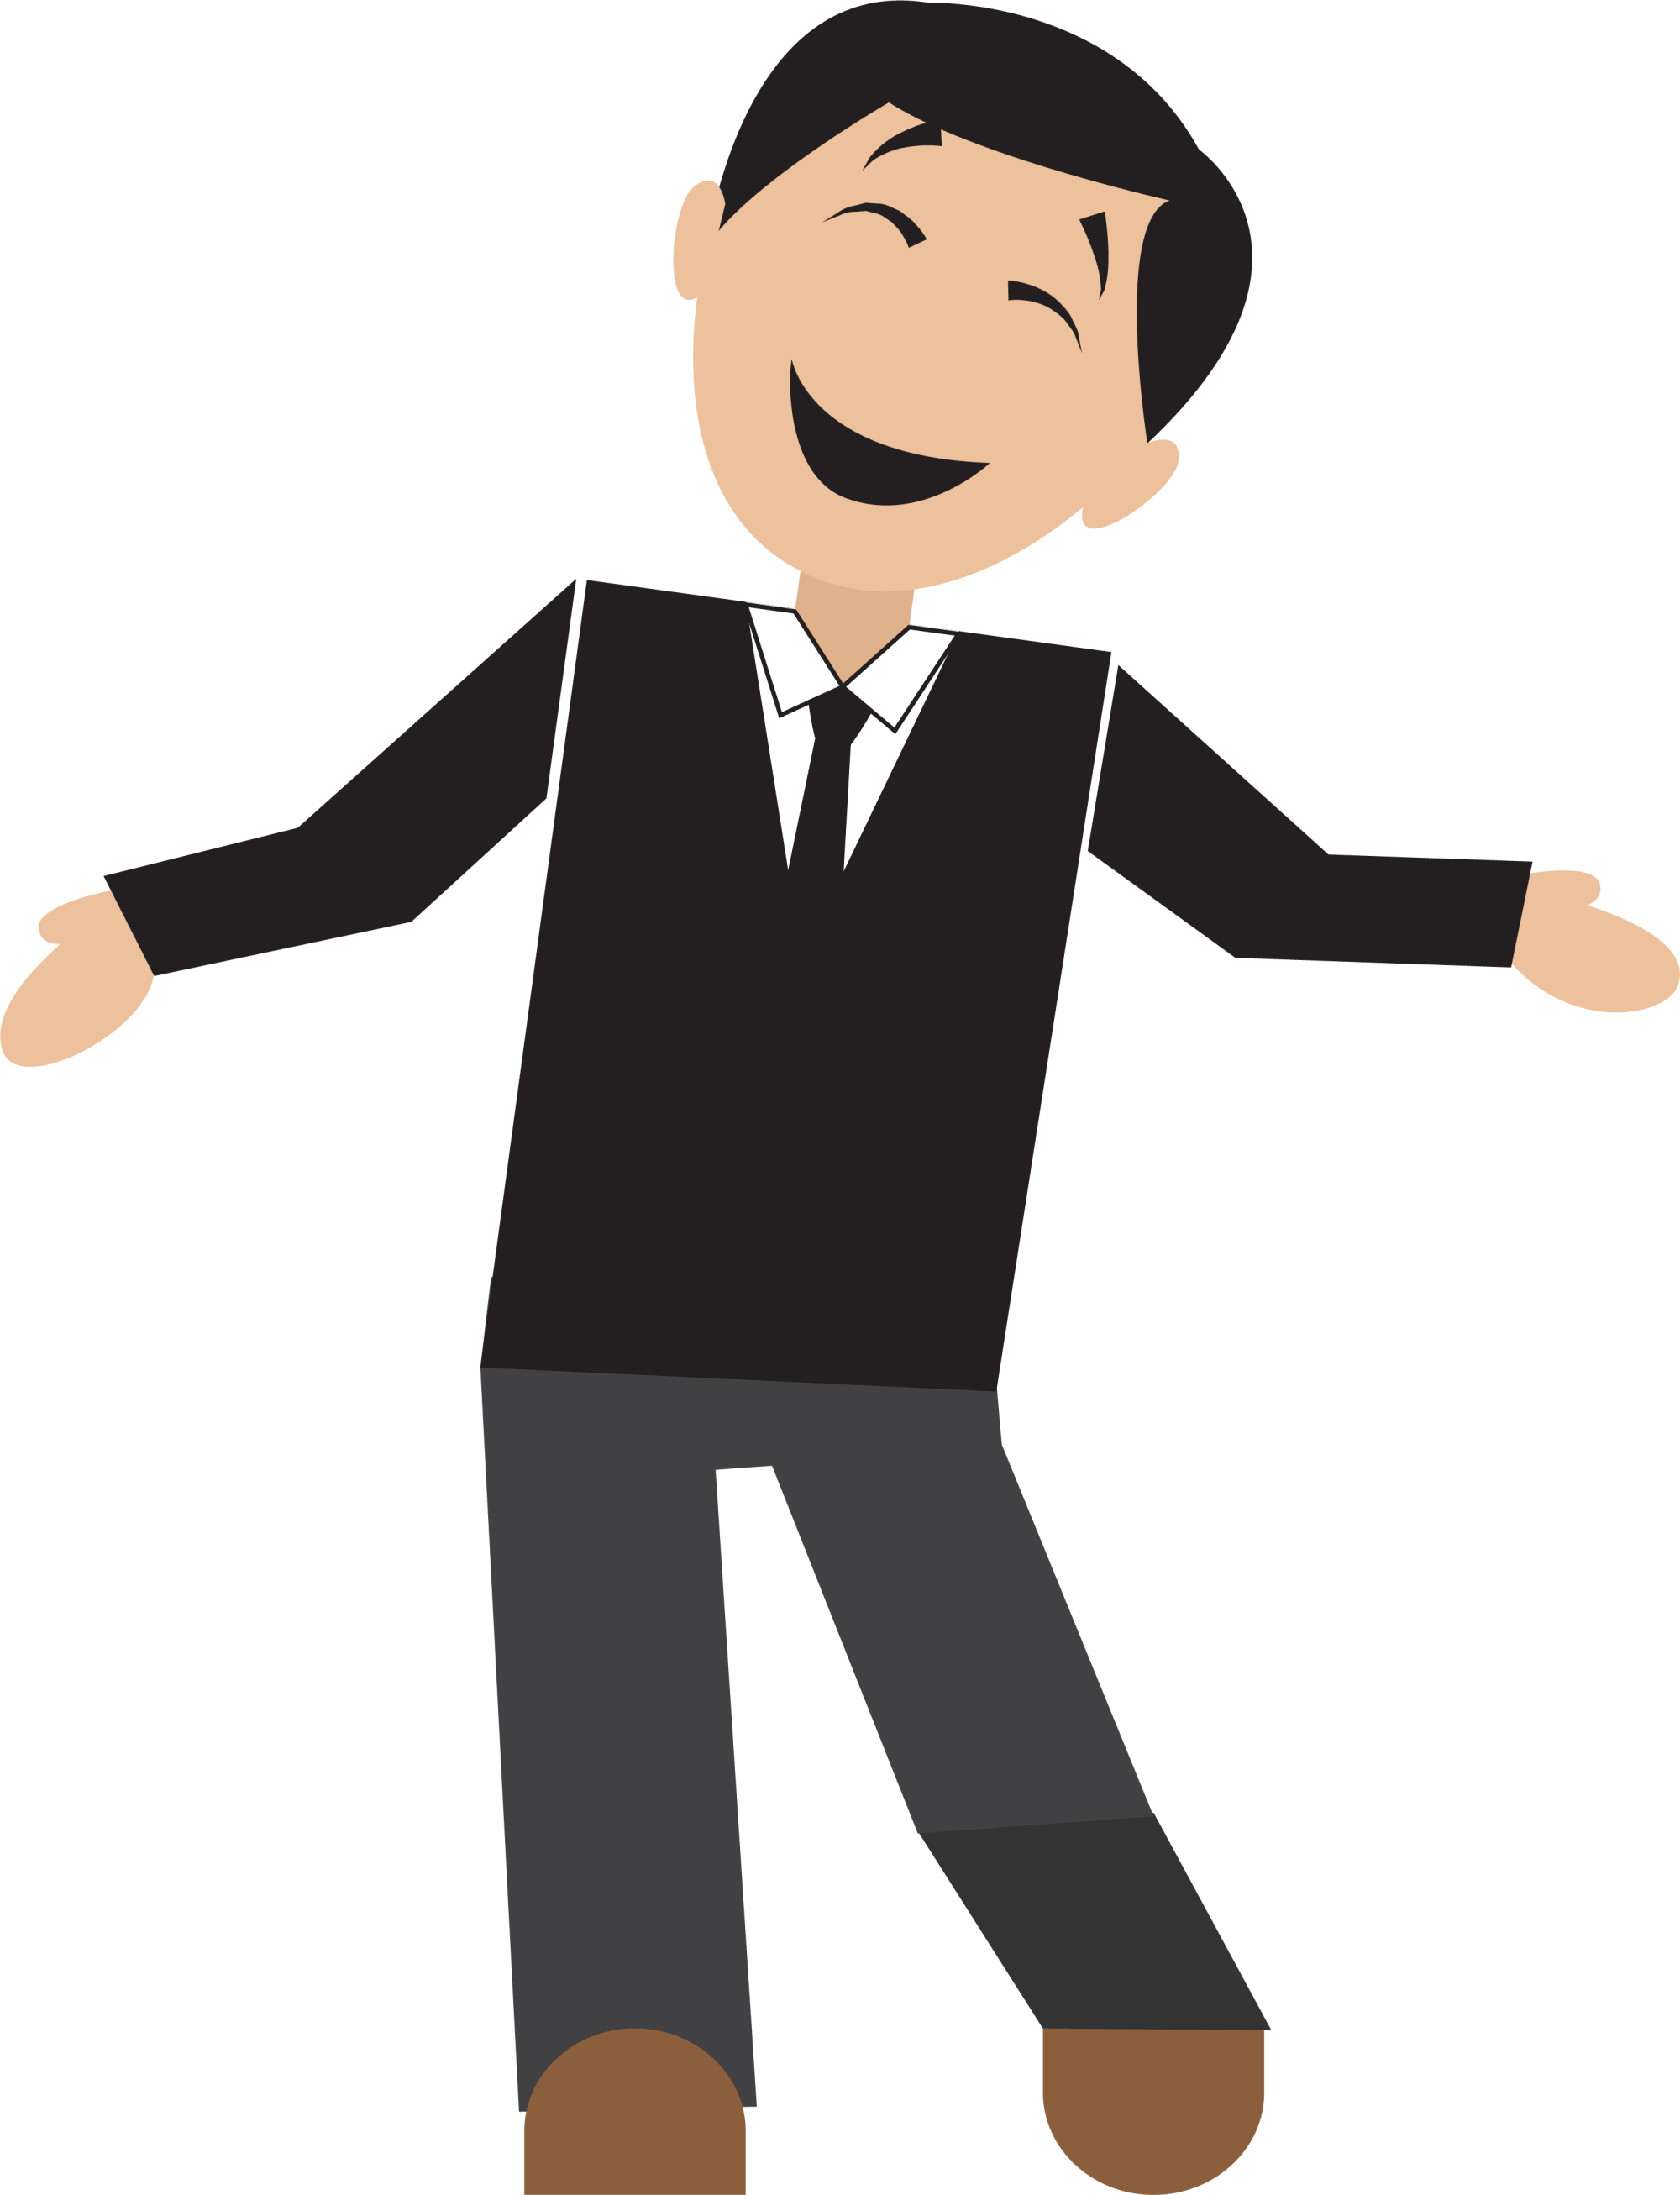 Cartoon drawing black happy. Happiness clipart business worker